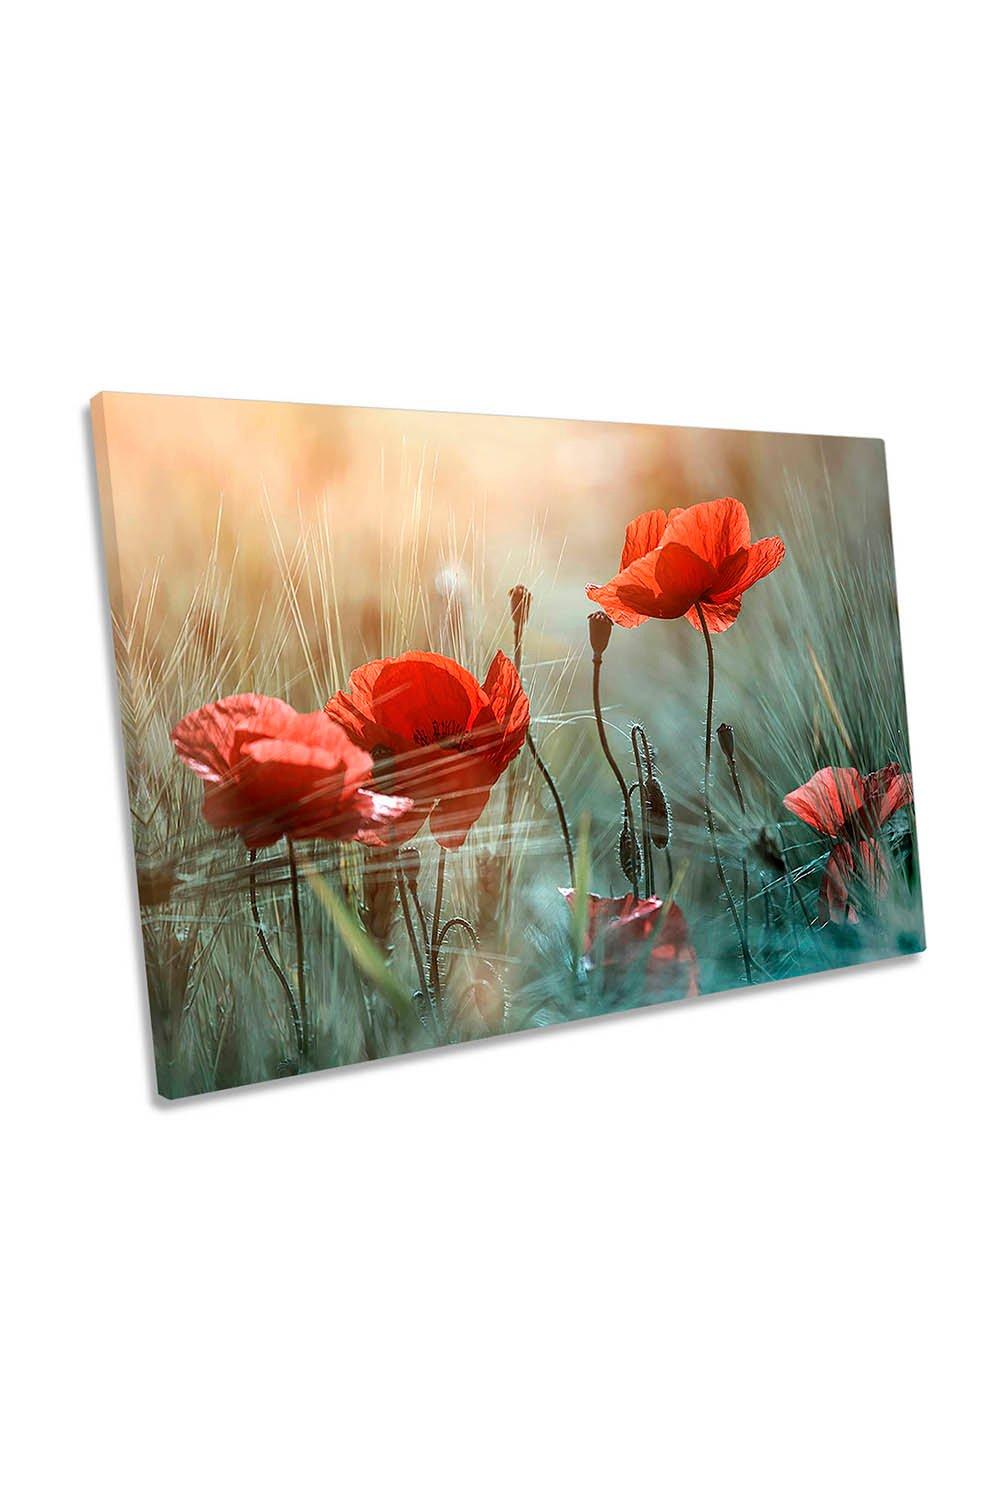 Red Poppies Sunlight Flowers Floral Canvas Wall Art Picture Print